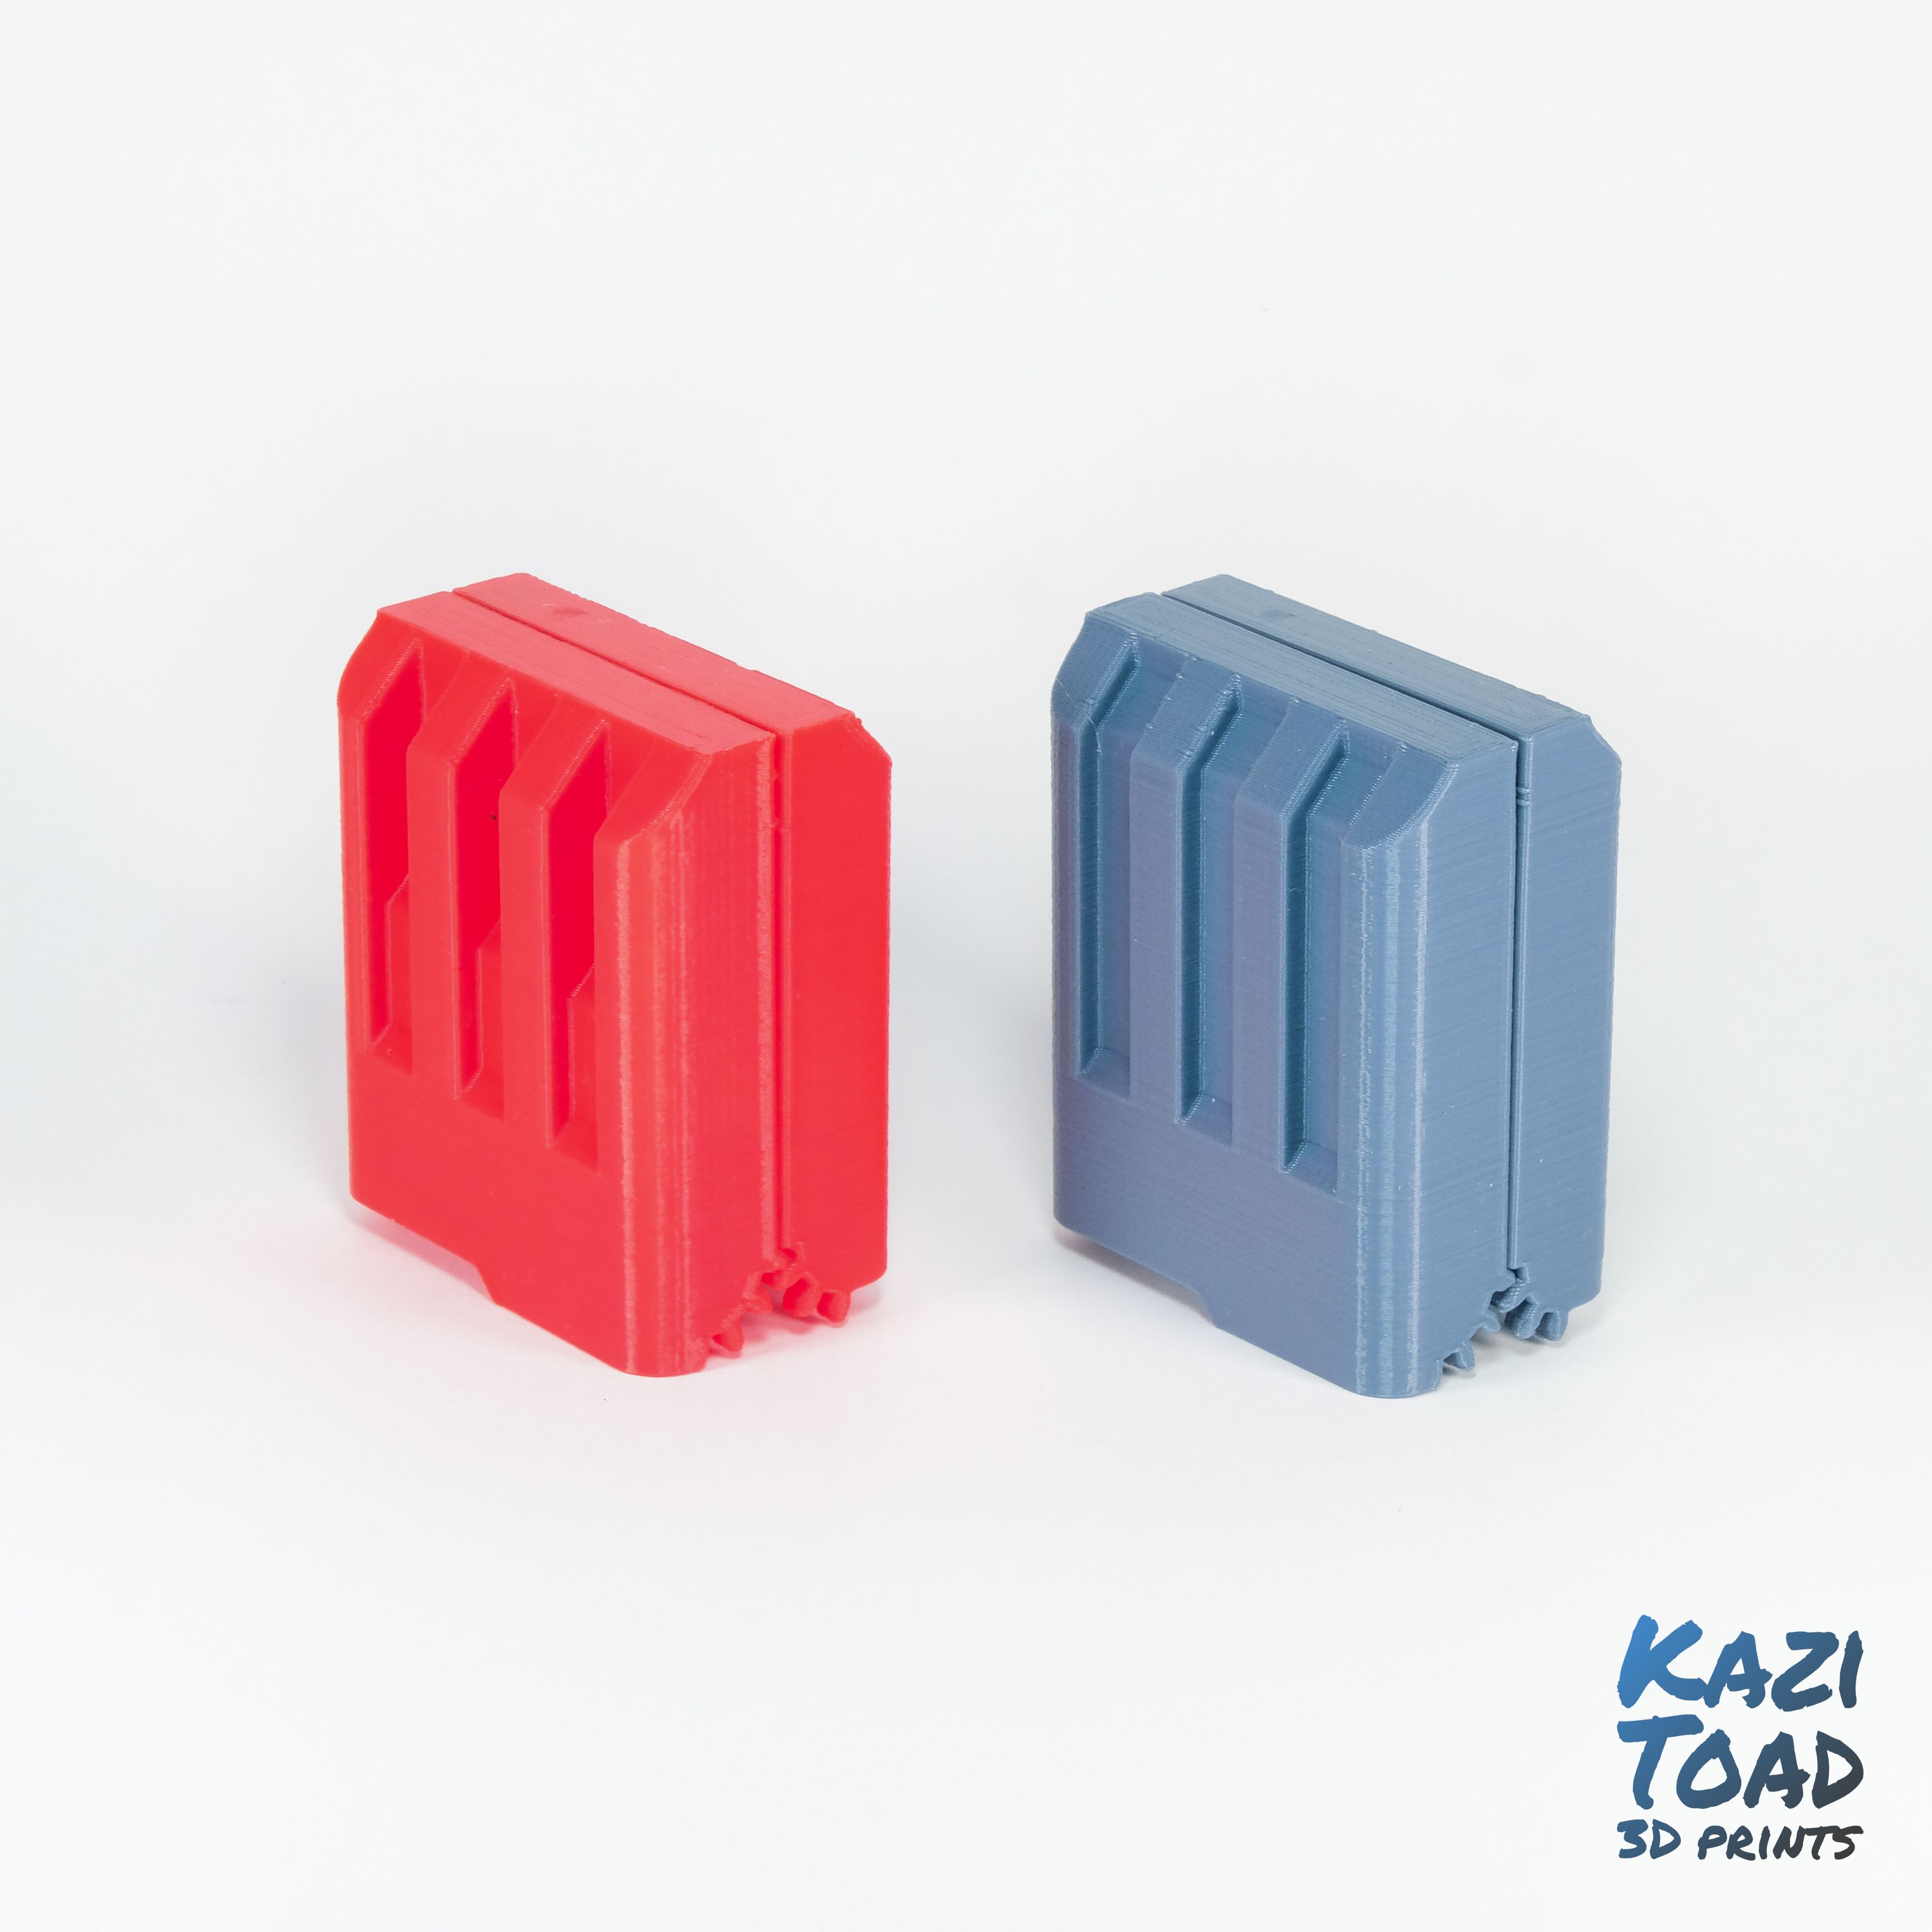 sd red blue 1.jpg Download free STL file Geared SD Card Case with Snap-fit Hinge and magnets too :) • 3D printing model, KaziToad